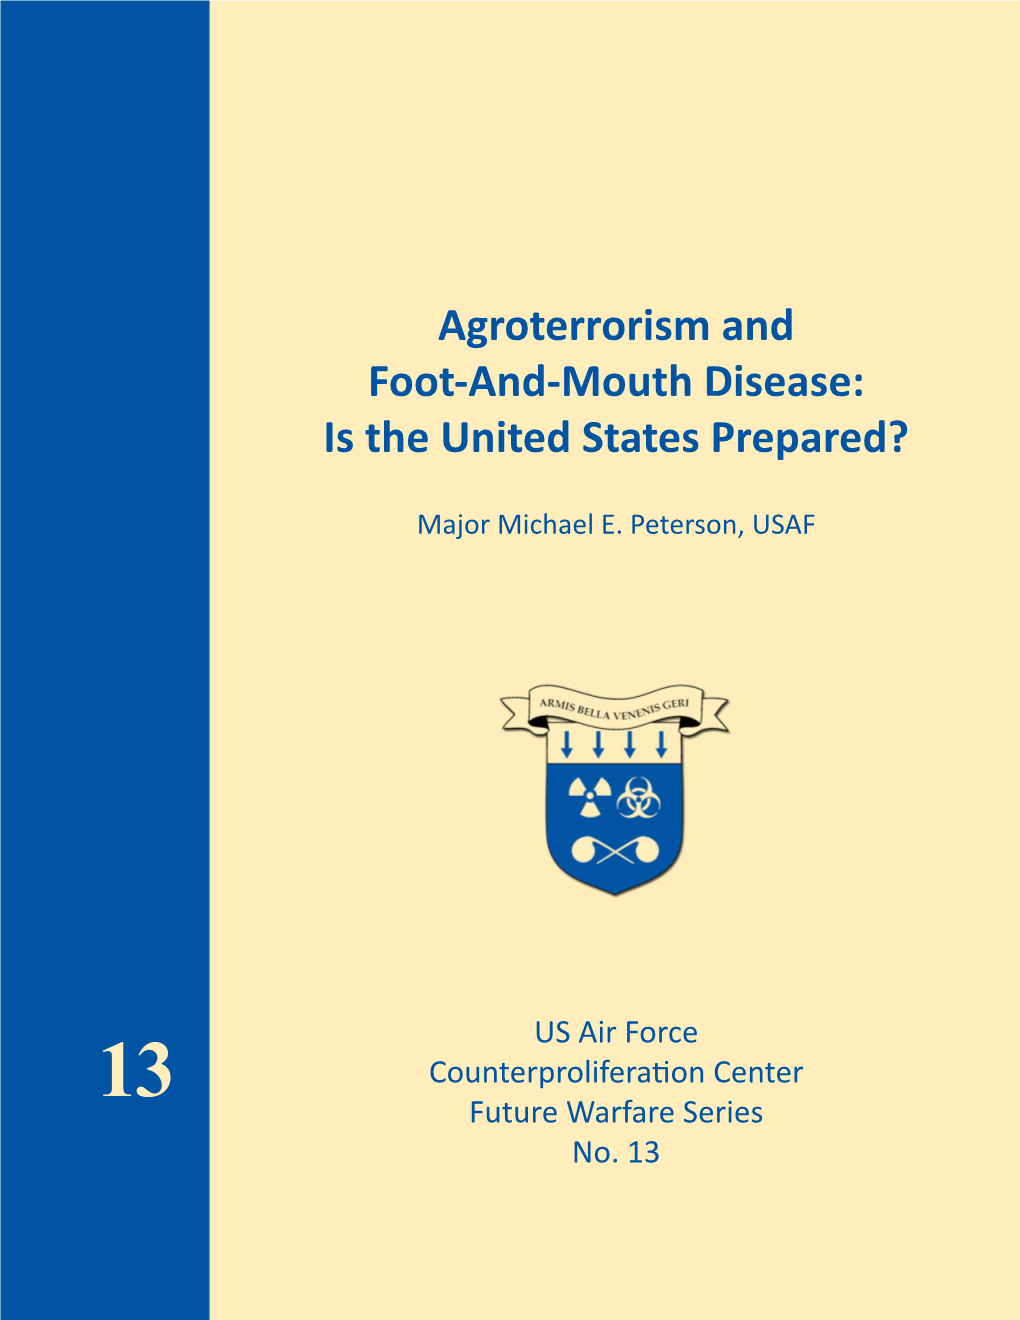 Agroterrorism and Foot-And-Mouth Disease: Is the United States Prepared?